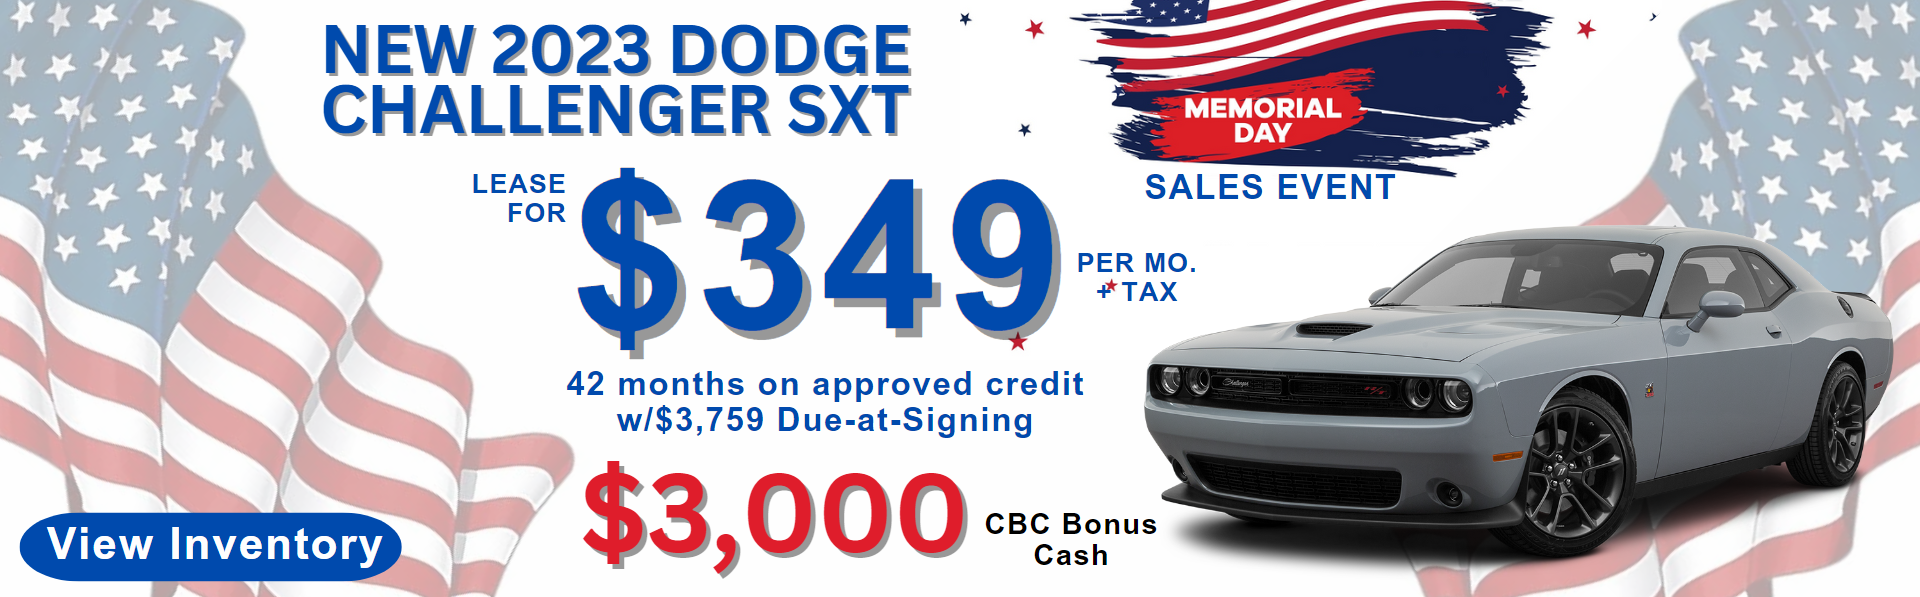 New 2023 Dodge Challenger Lease